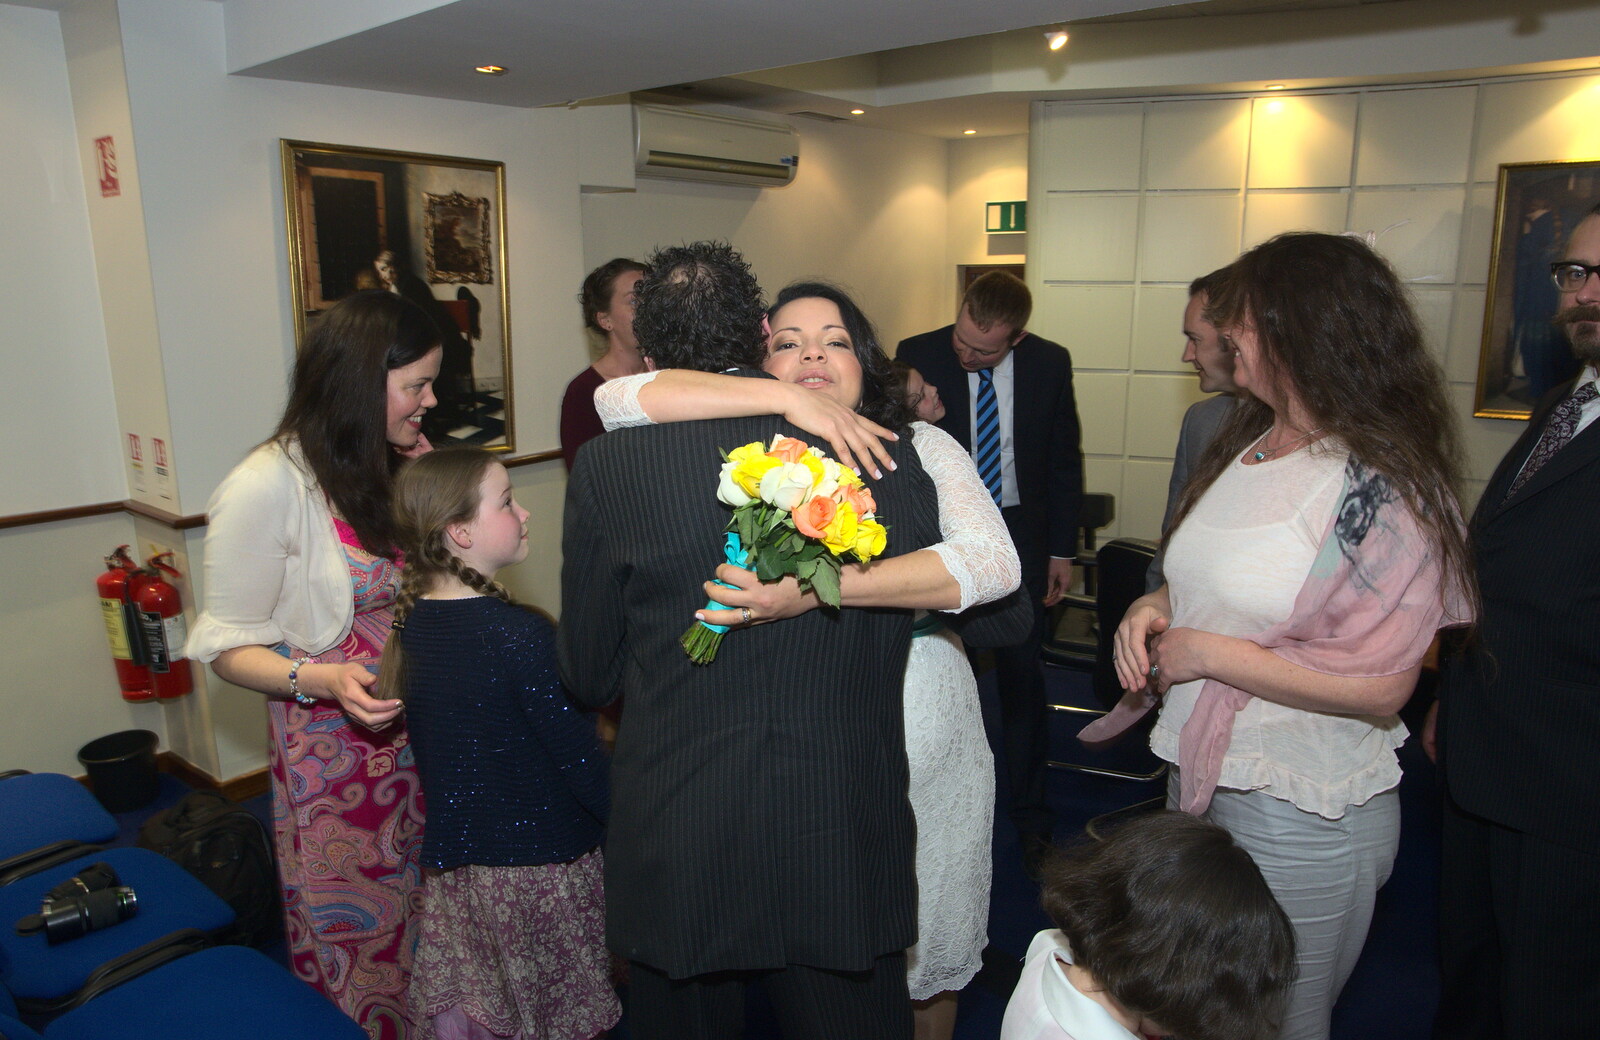 Philly gets a hug from James and Haryanna's Wedding, Grand Canal Dock, Dublin - 15th April 2015